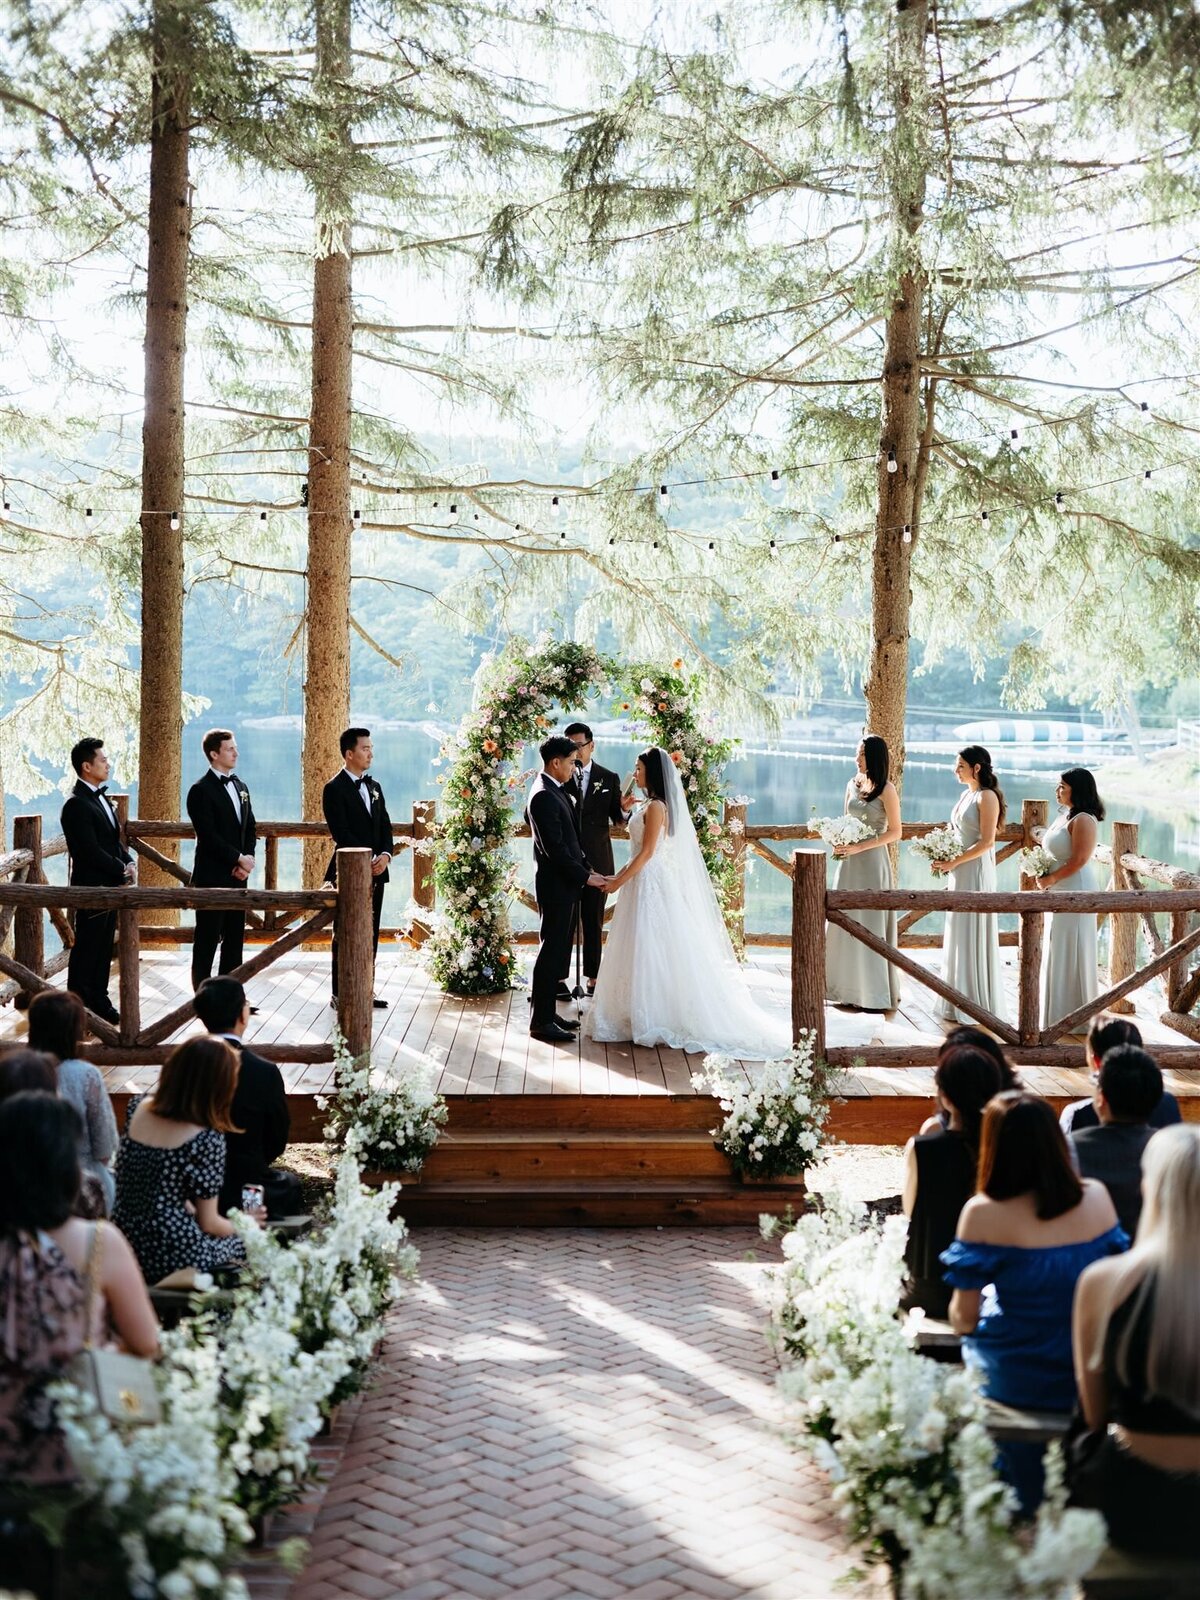 Bride and groom embrace for kiss during wedding ceremony on deck in front of stunning floral arbor, pine trees, and lake in Hudson Valley.